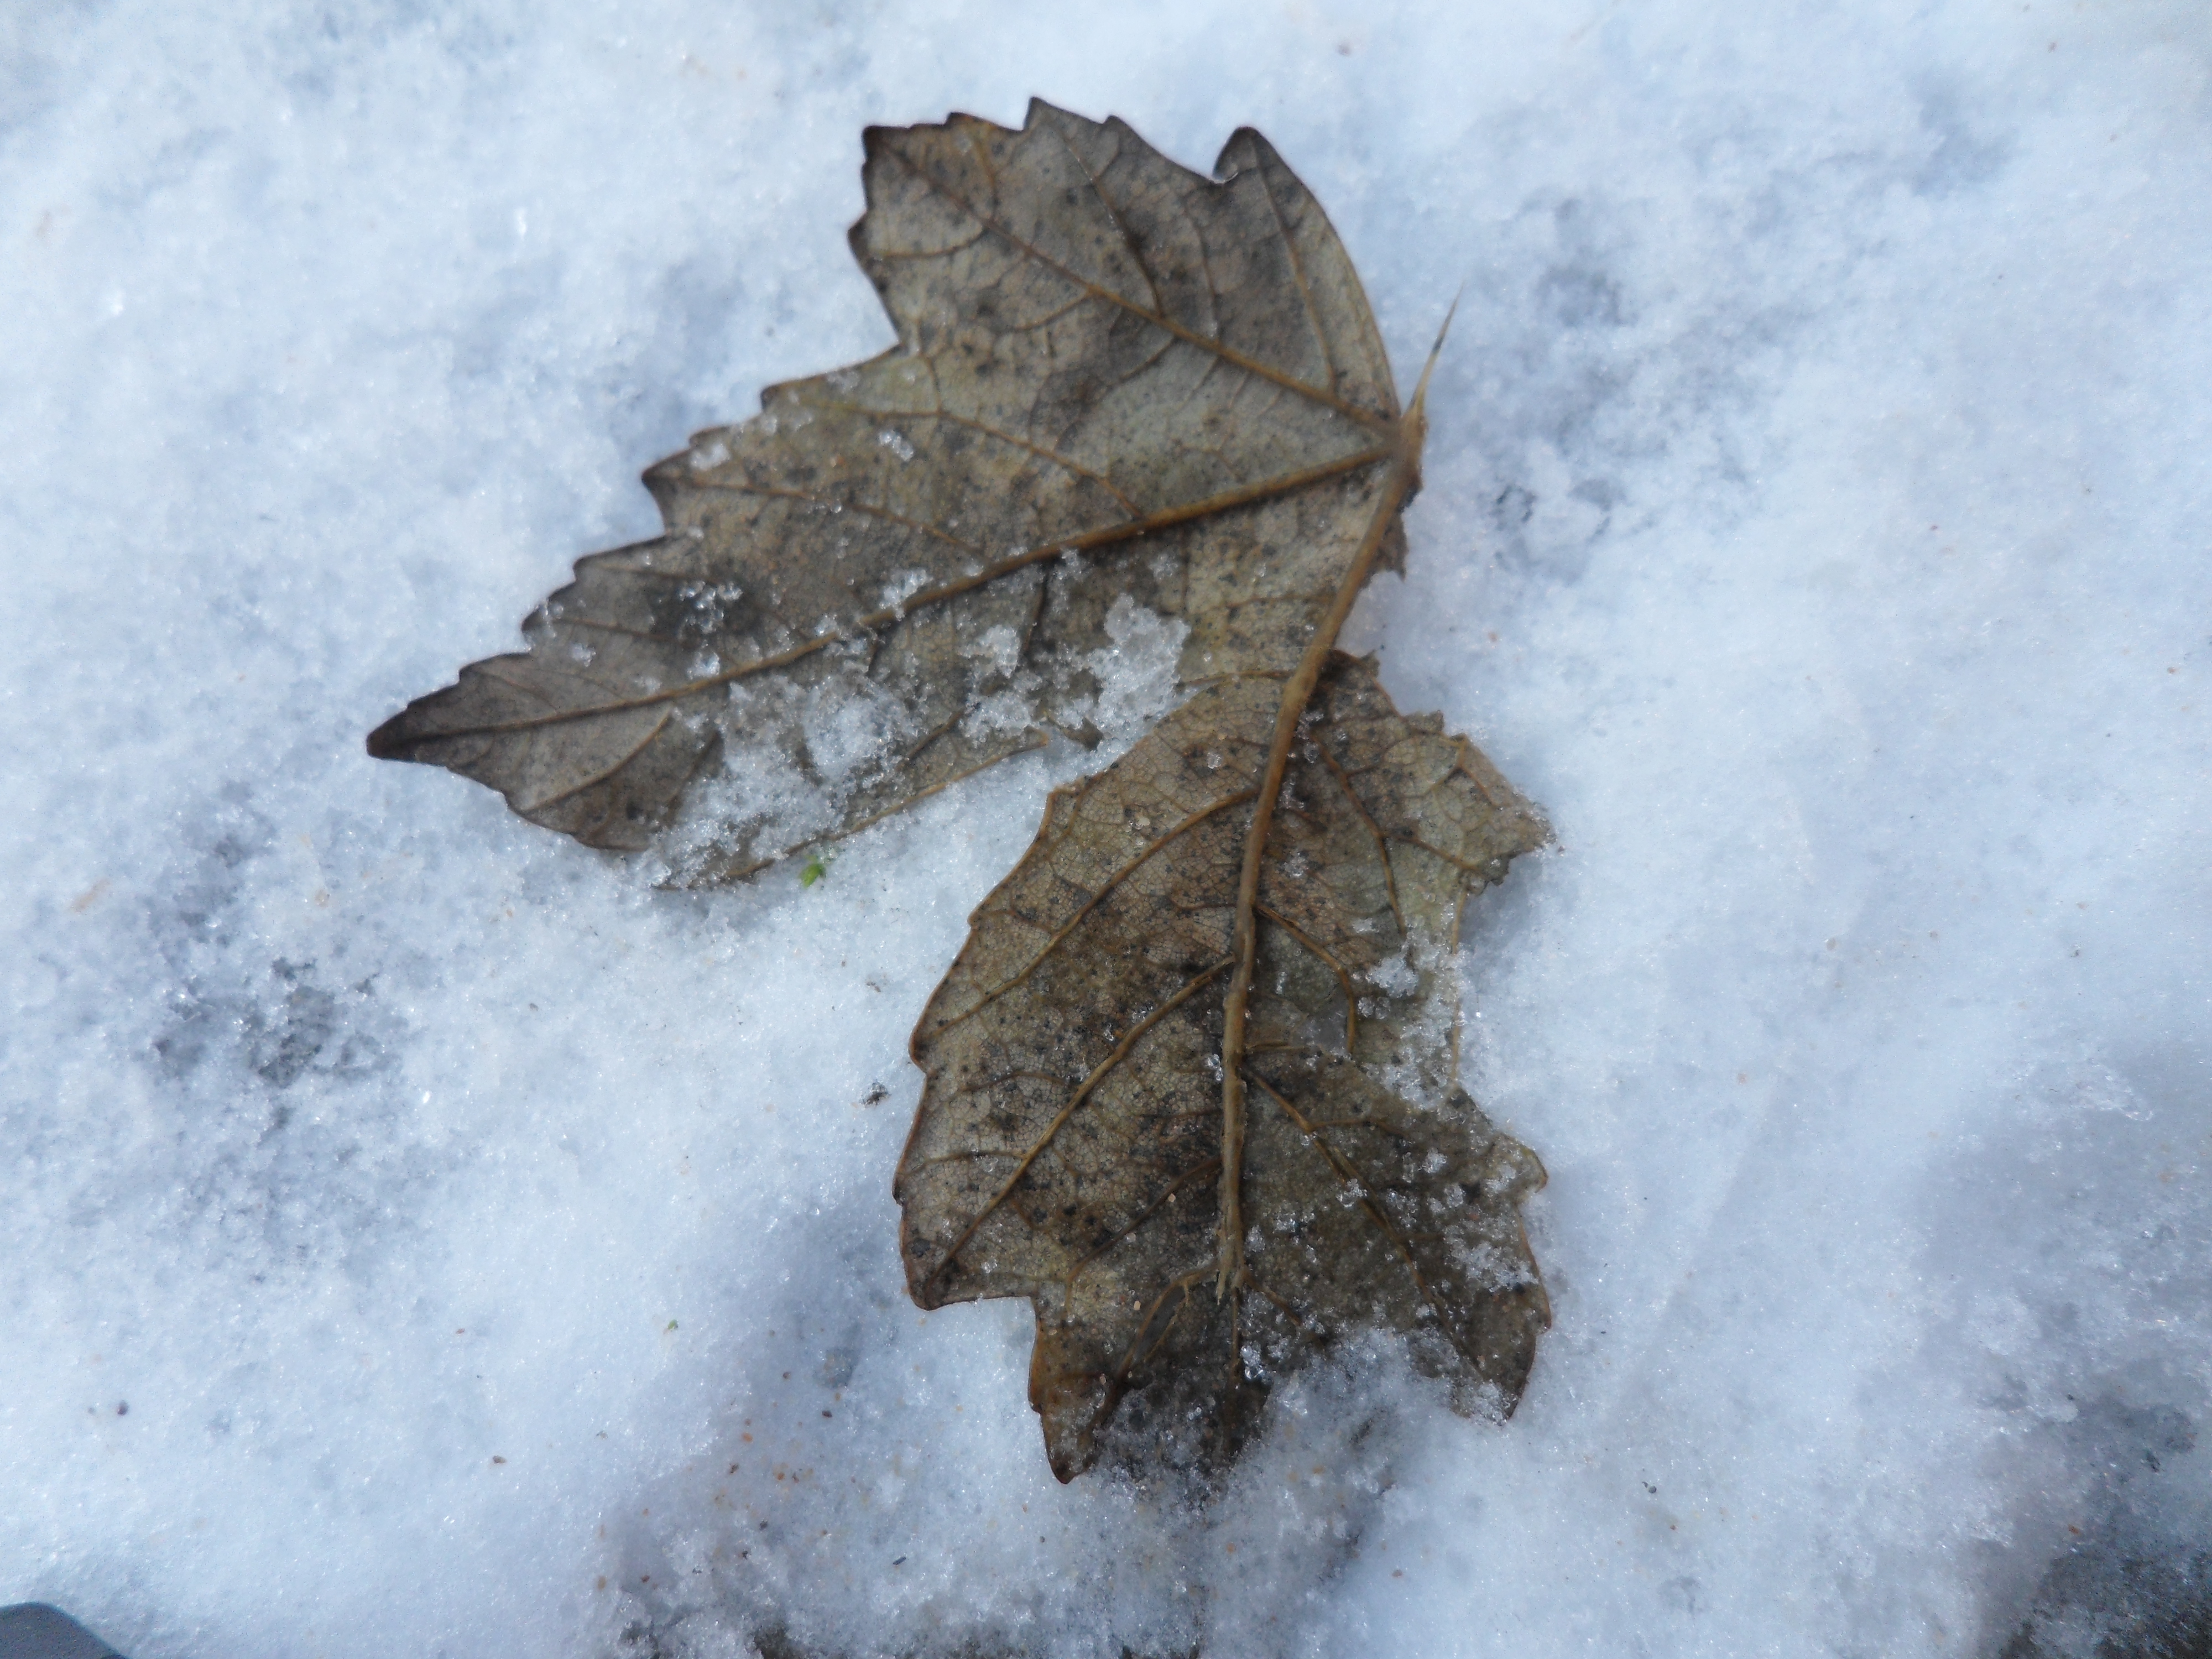 Royalty Free Stock Photos of an Oak leaf in snow (2 Images)